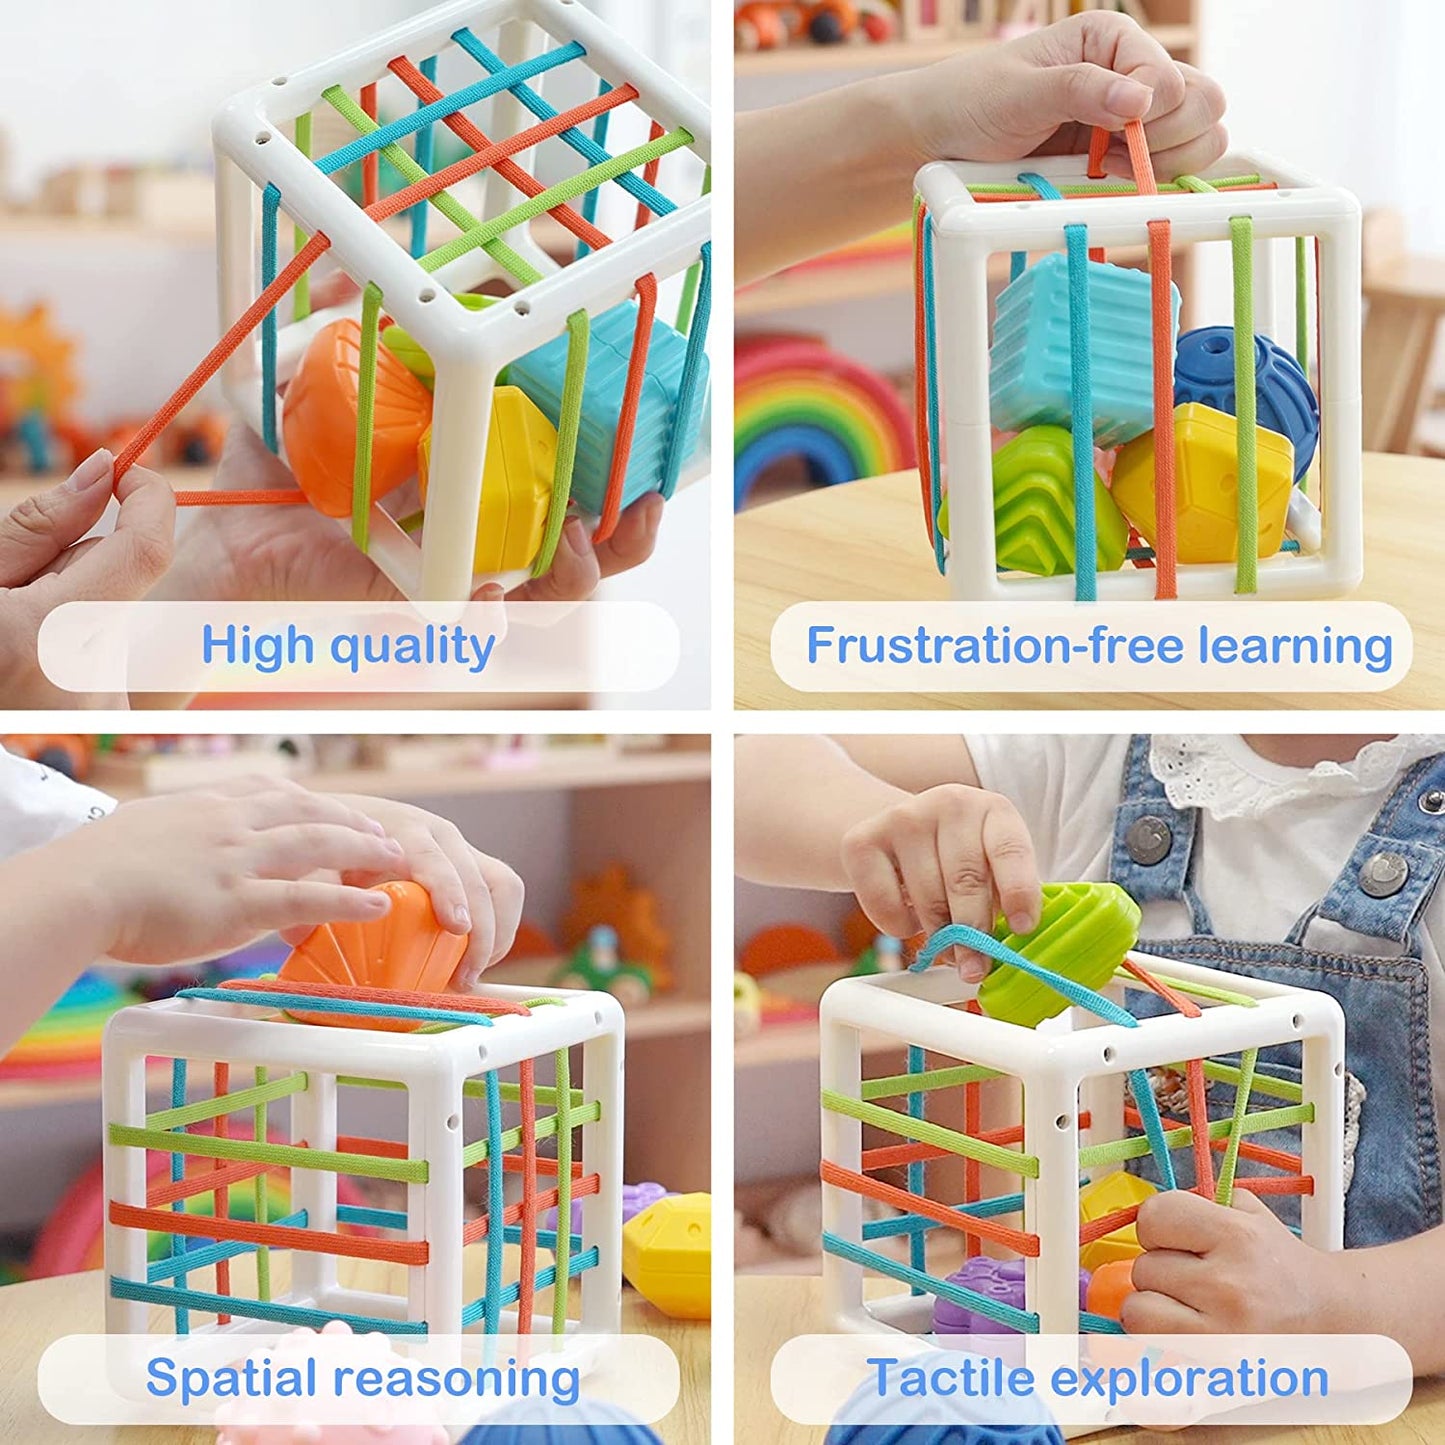 Montessori Toys for 1 Year Old,Baby Sorter Toy Colorful Cube and 6 Pcs Multi Sensory Shape,Developmental Learning Toys for Girls Boys Easter Baby Gift Sets